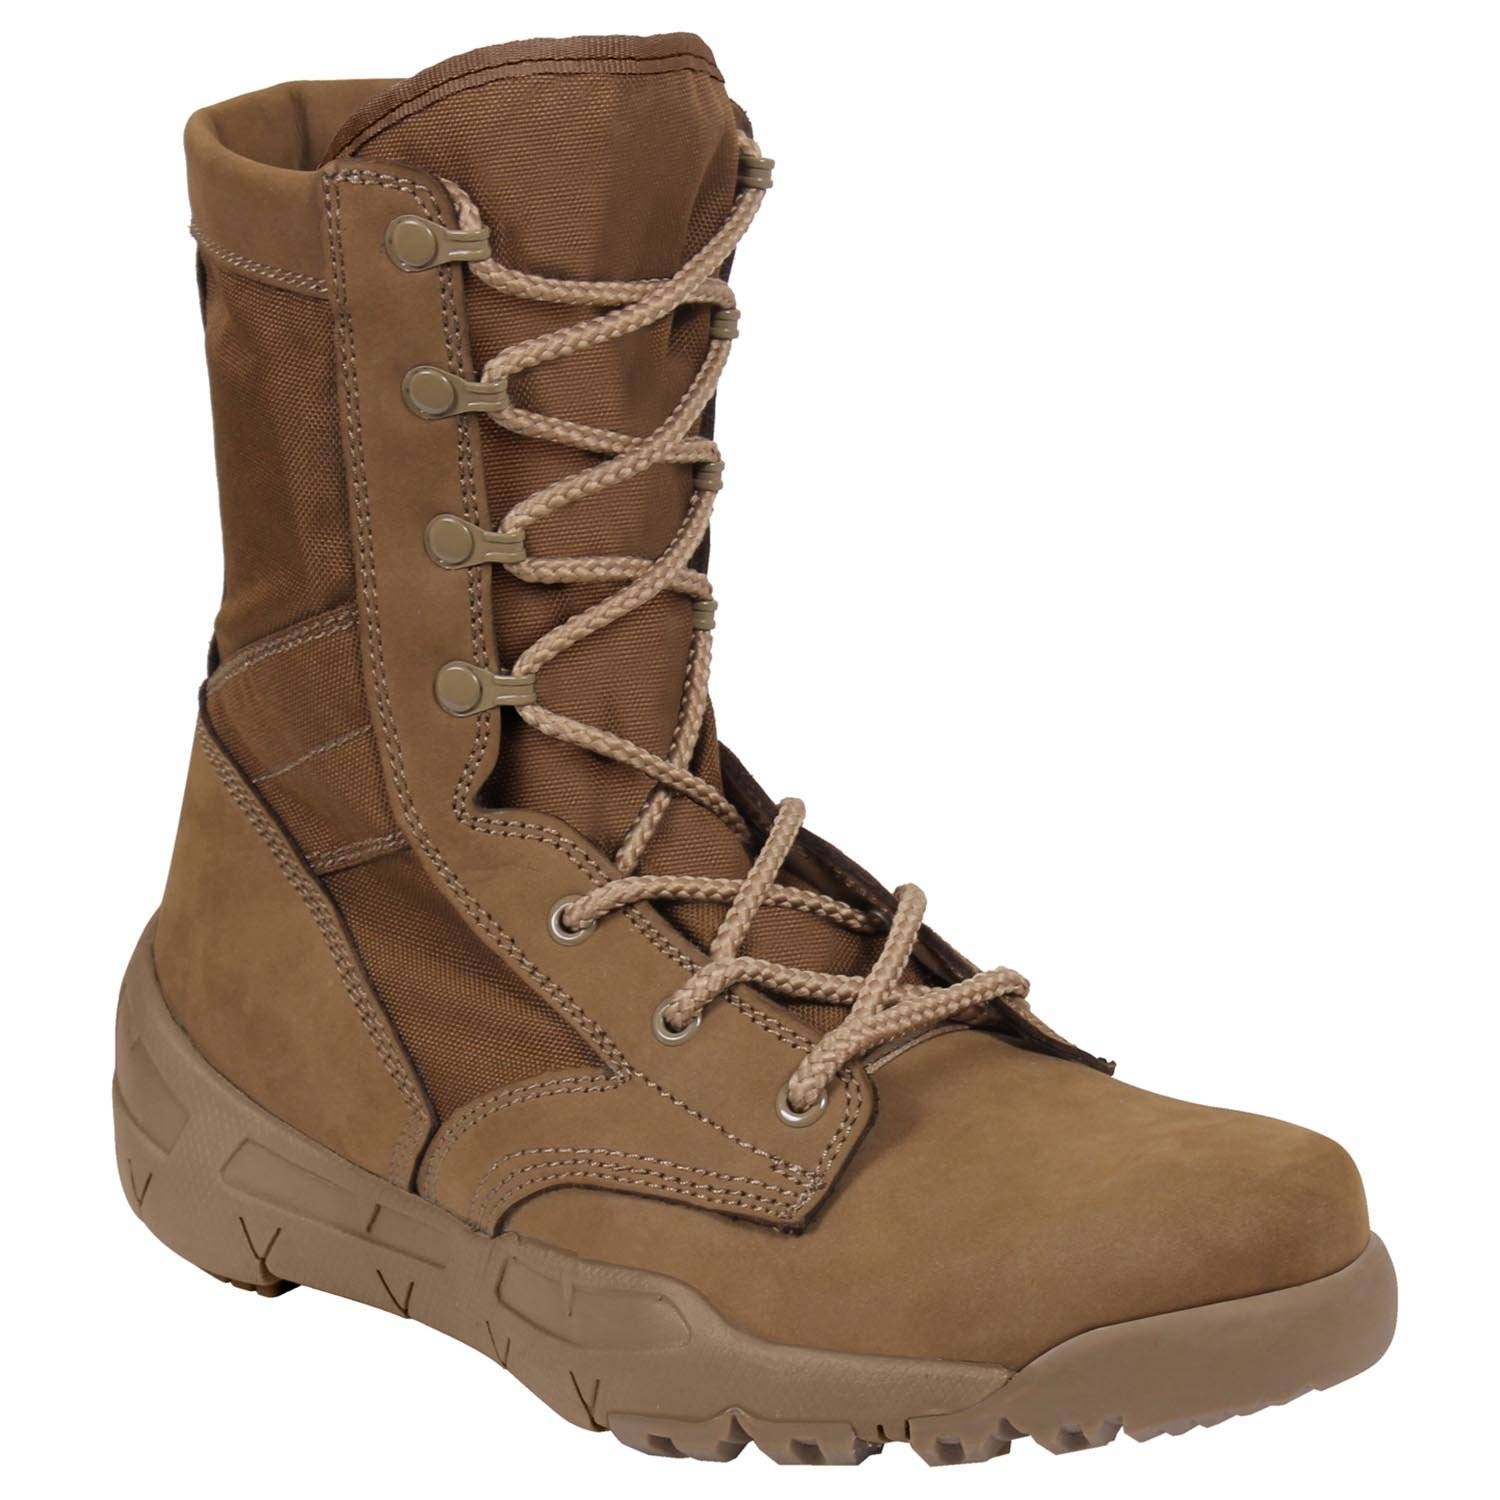 Rothco V-Max Lightweight 8" Tactical Boots